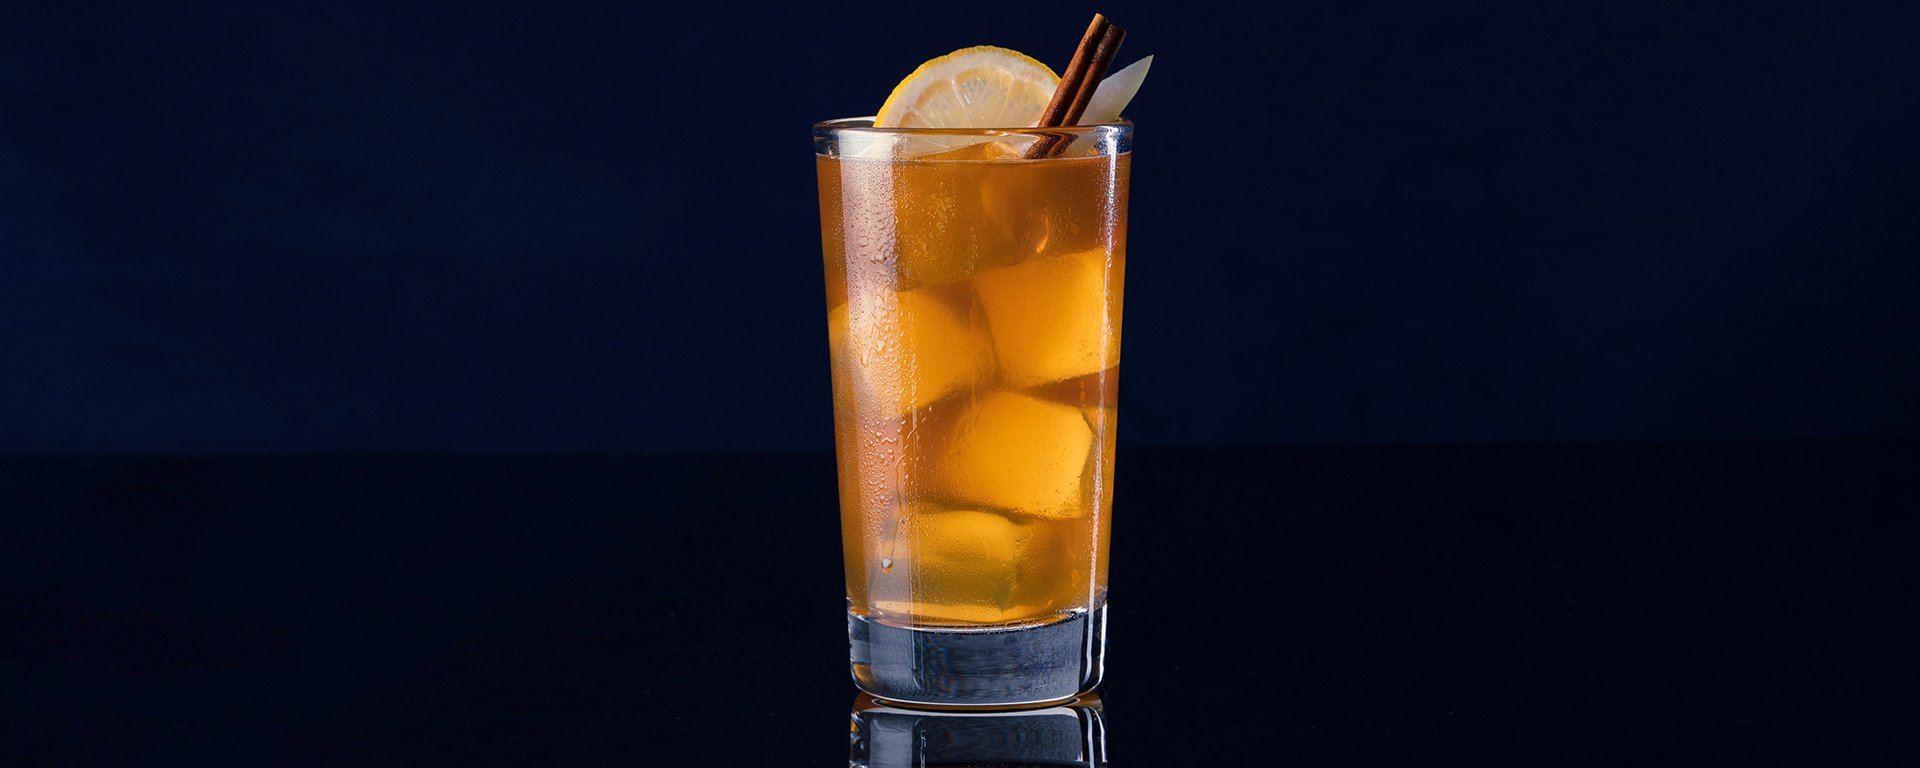 Fish House Punch Cocktail Recipe Martell Cognac Cocktails